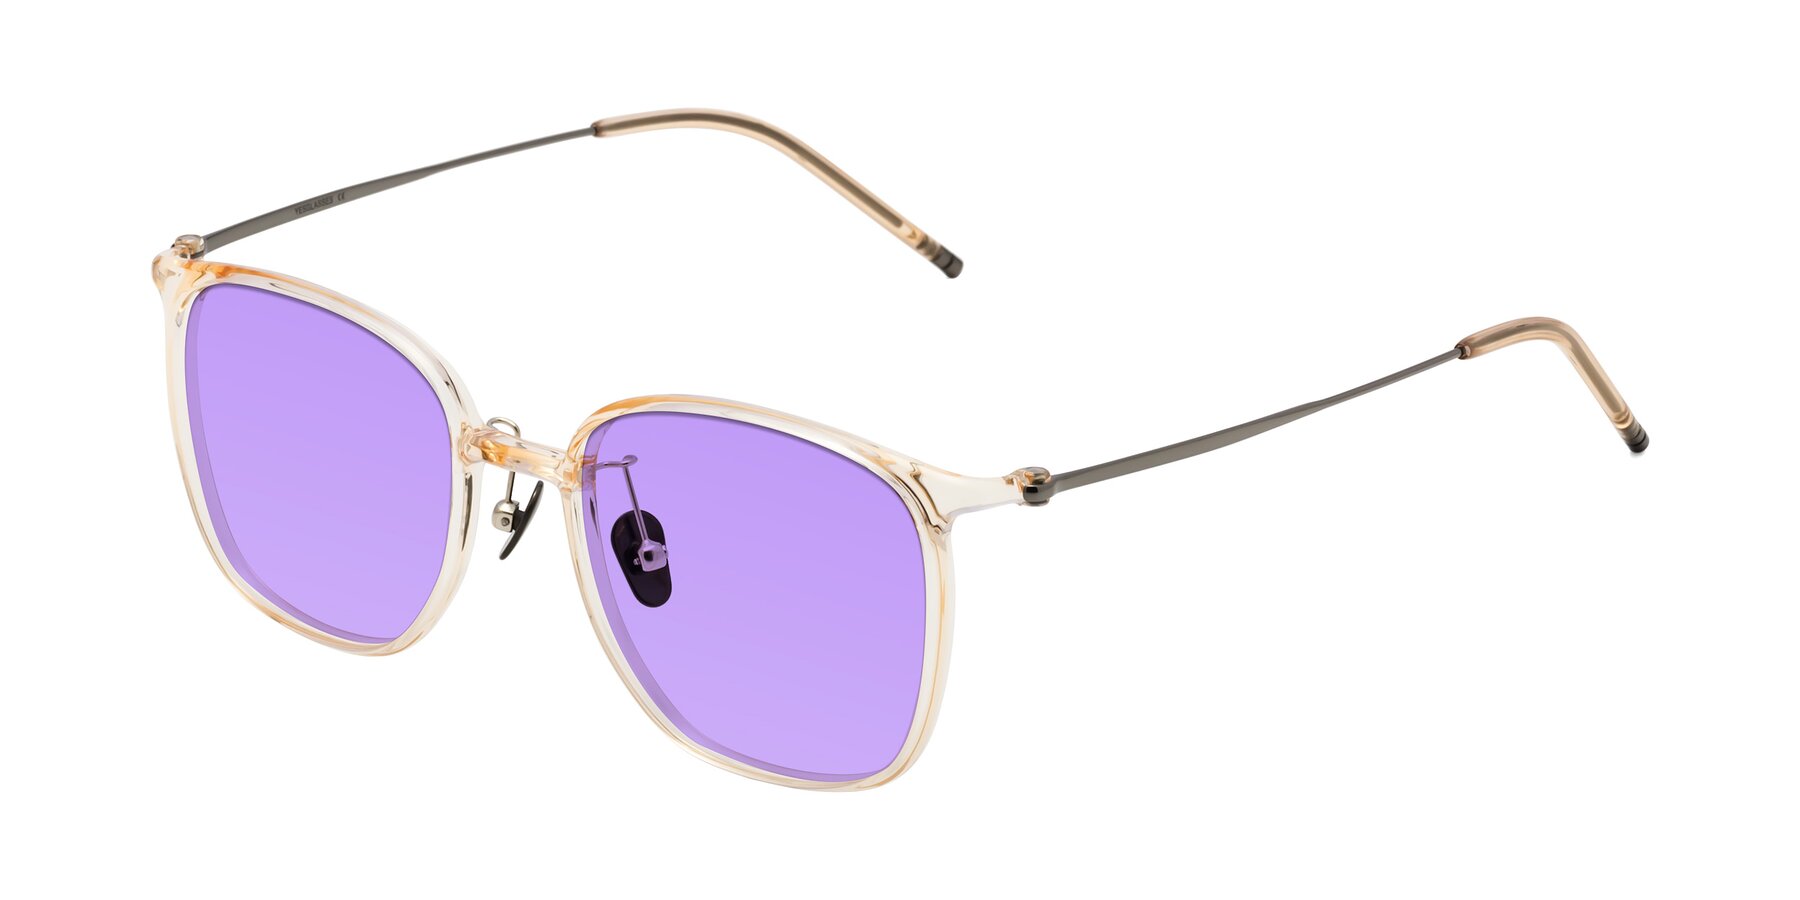 Angle of Manlius in Light Yellow with Medium Purple Tinted Lenses